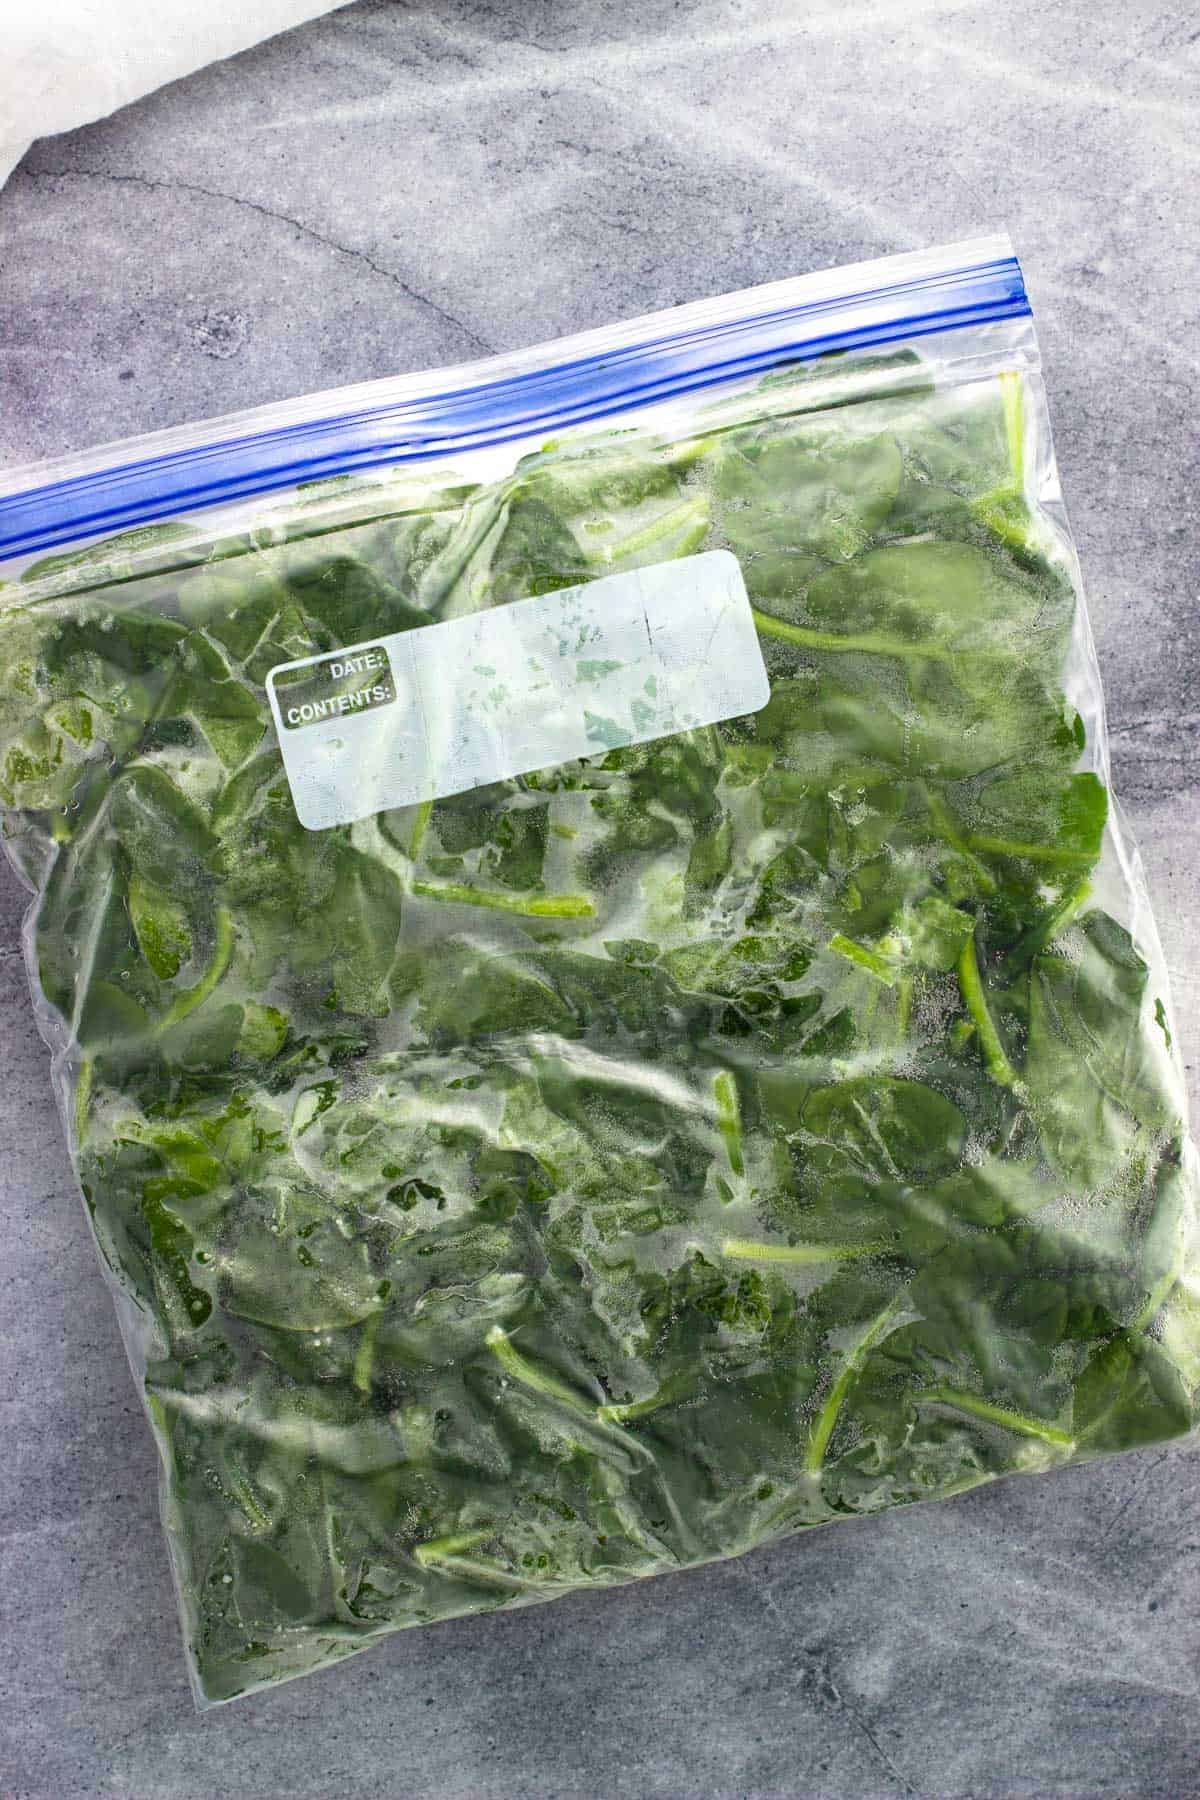 Frozen spinach leaves in a sealed plastic bag.